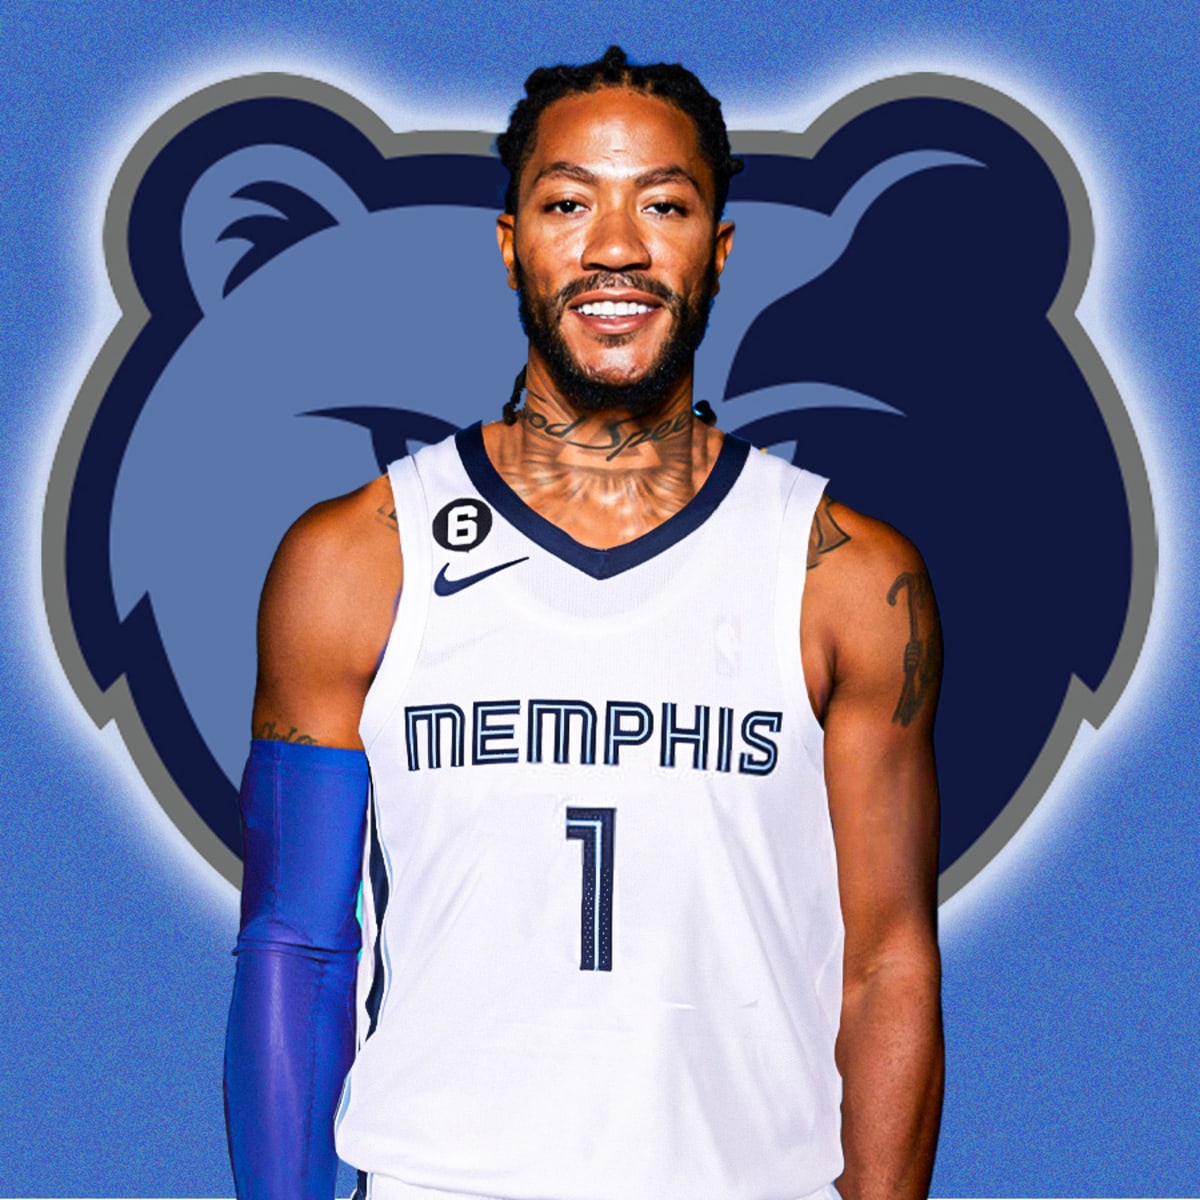 Derrick Rose, Marcus Smart want to win, not babysit Grizzlies' All